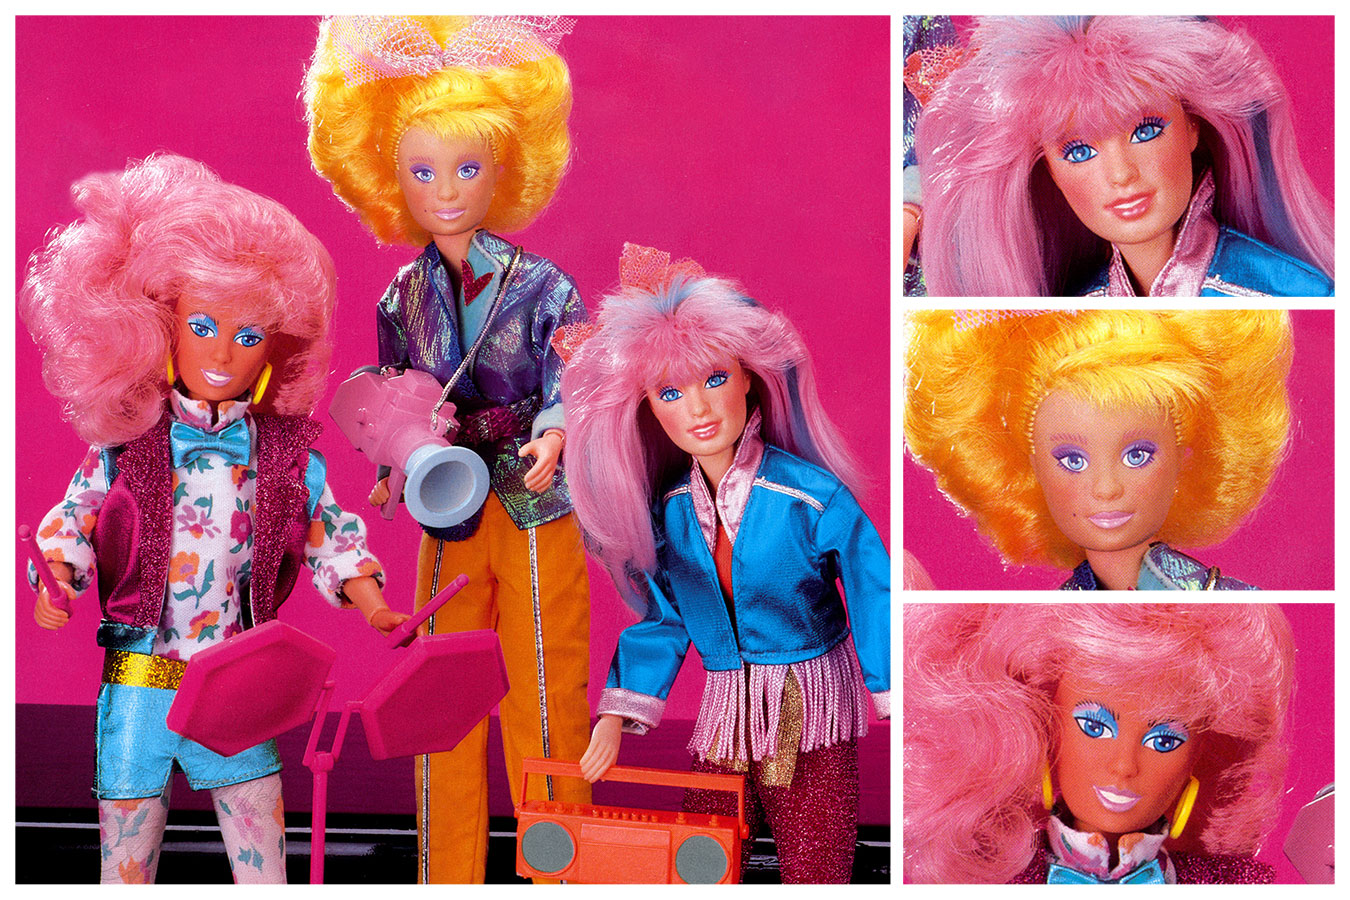 The Holograms 4005, Danse, Video, and Raya 1987 -- images from 1987 Hasbro Toy Fair Catalog